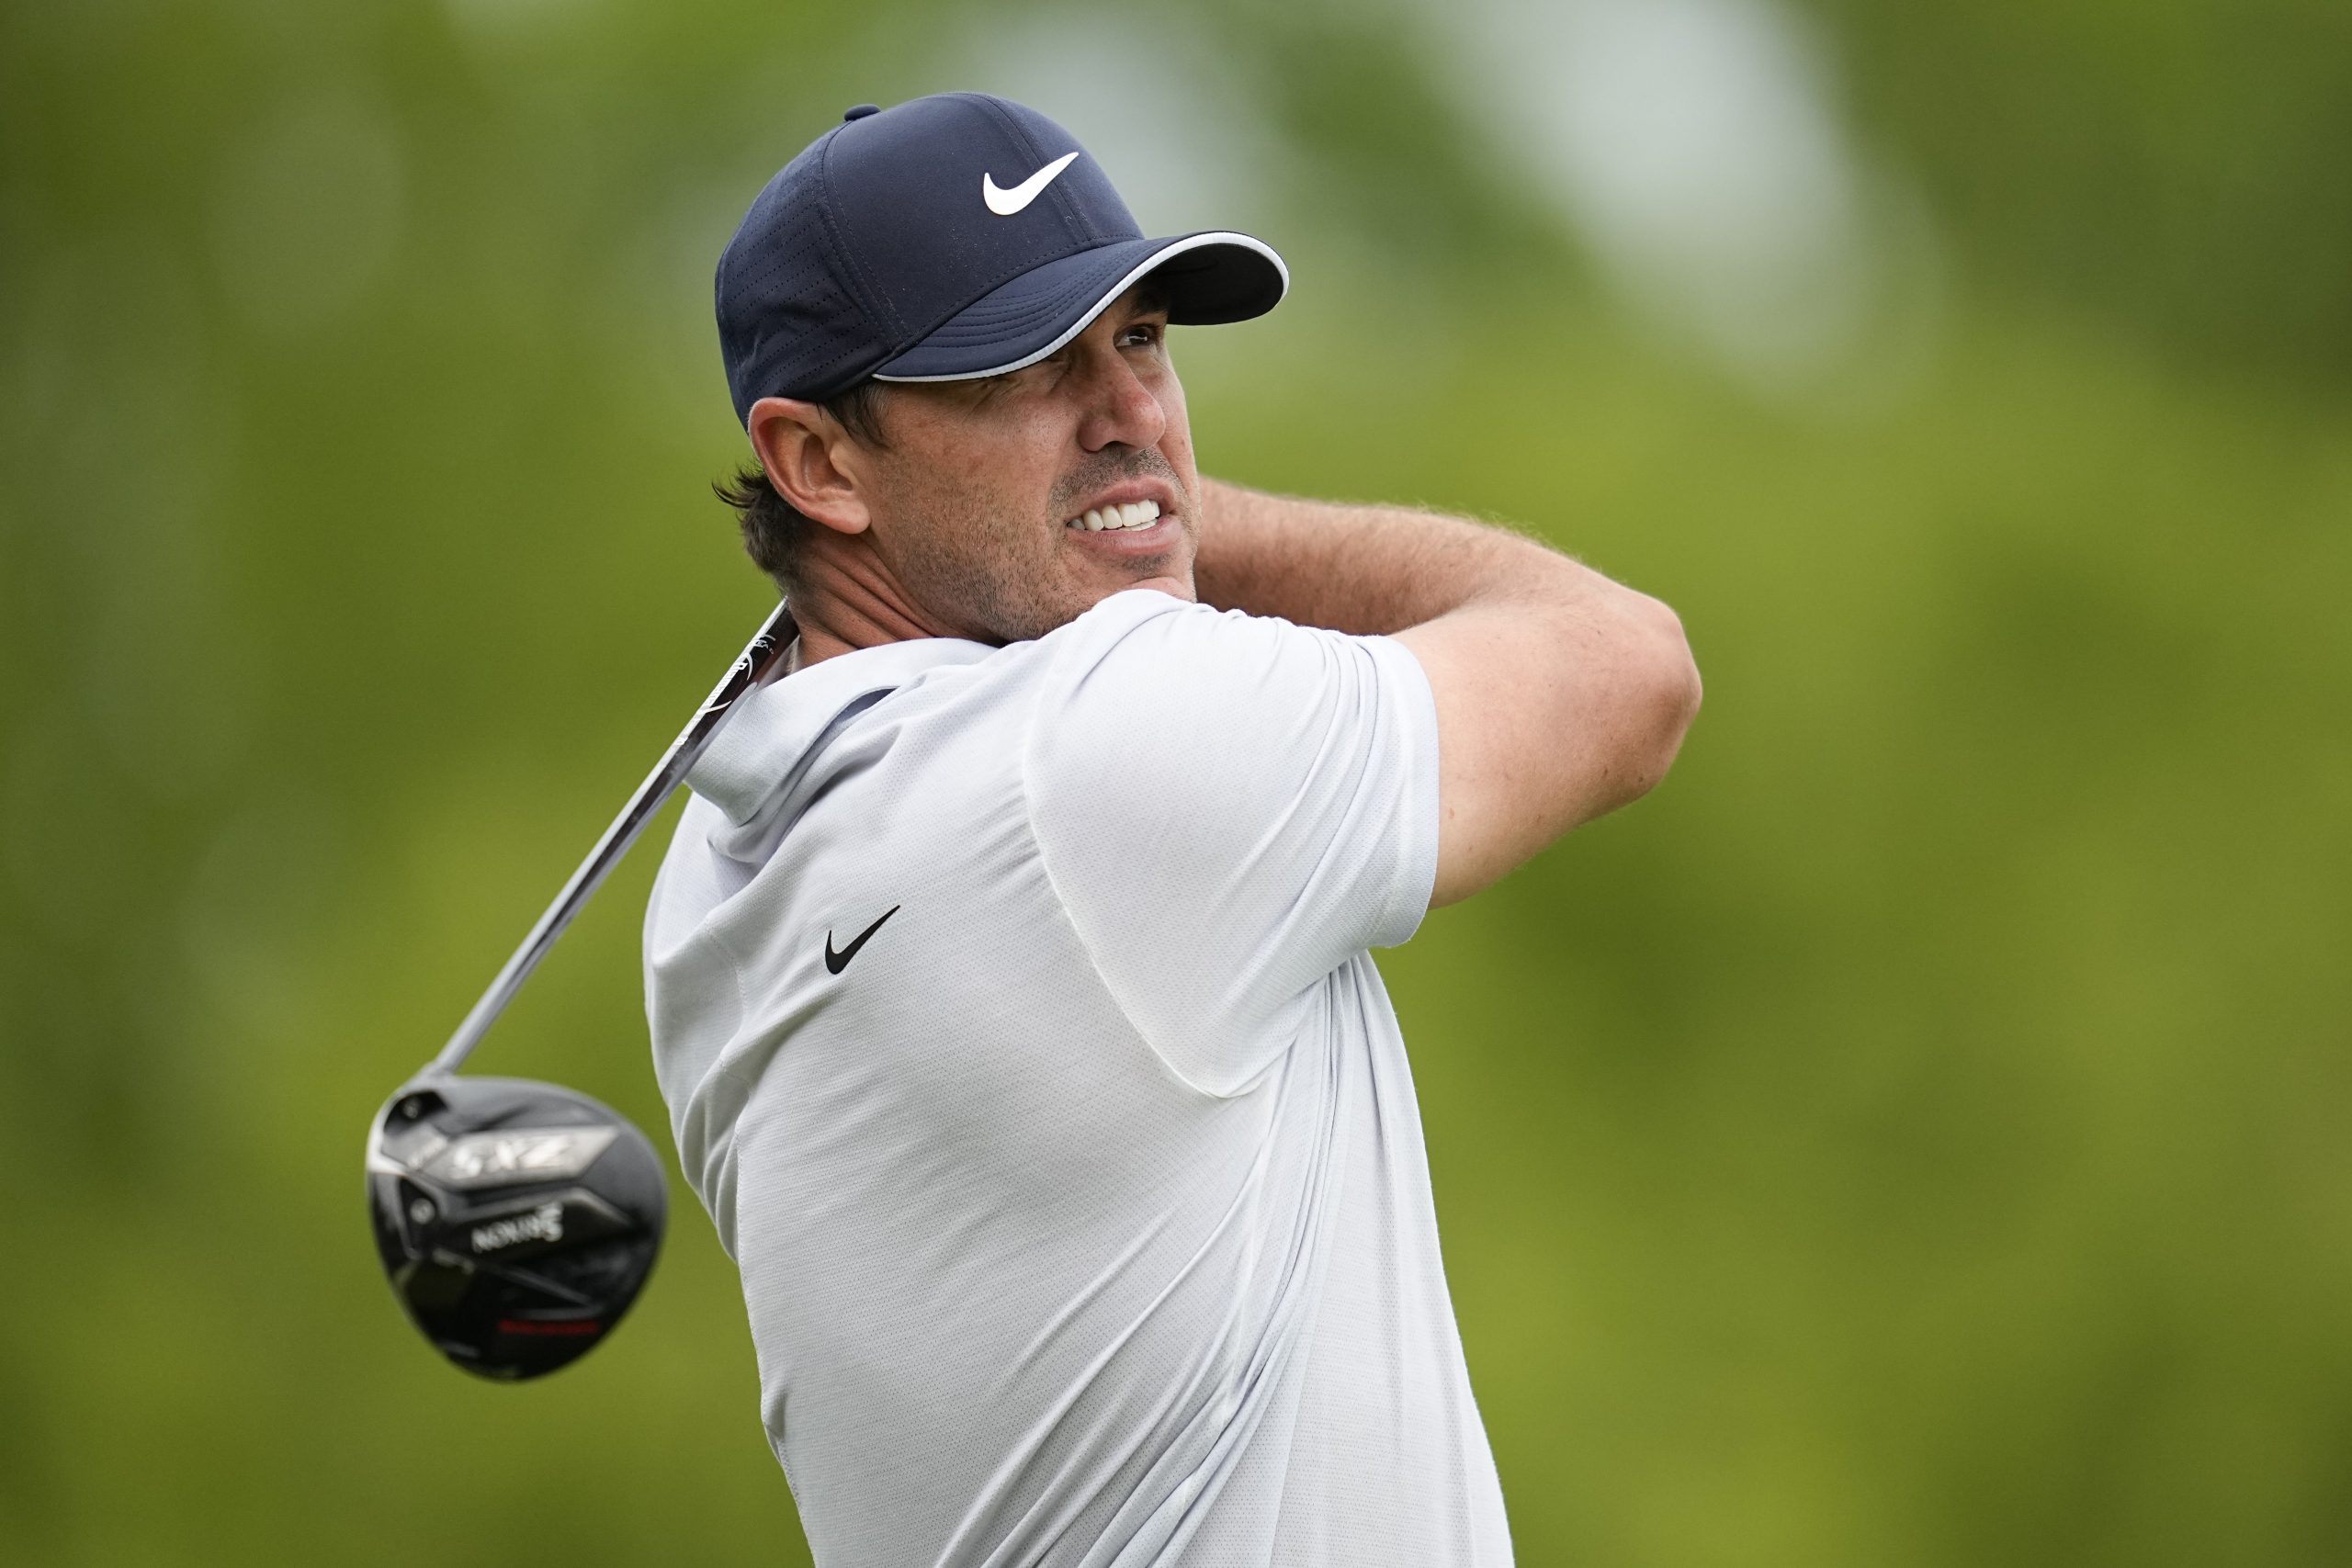 Brooks Koepka leads PGA Championship after three rounds